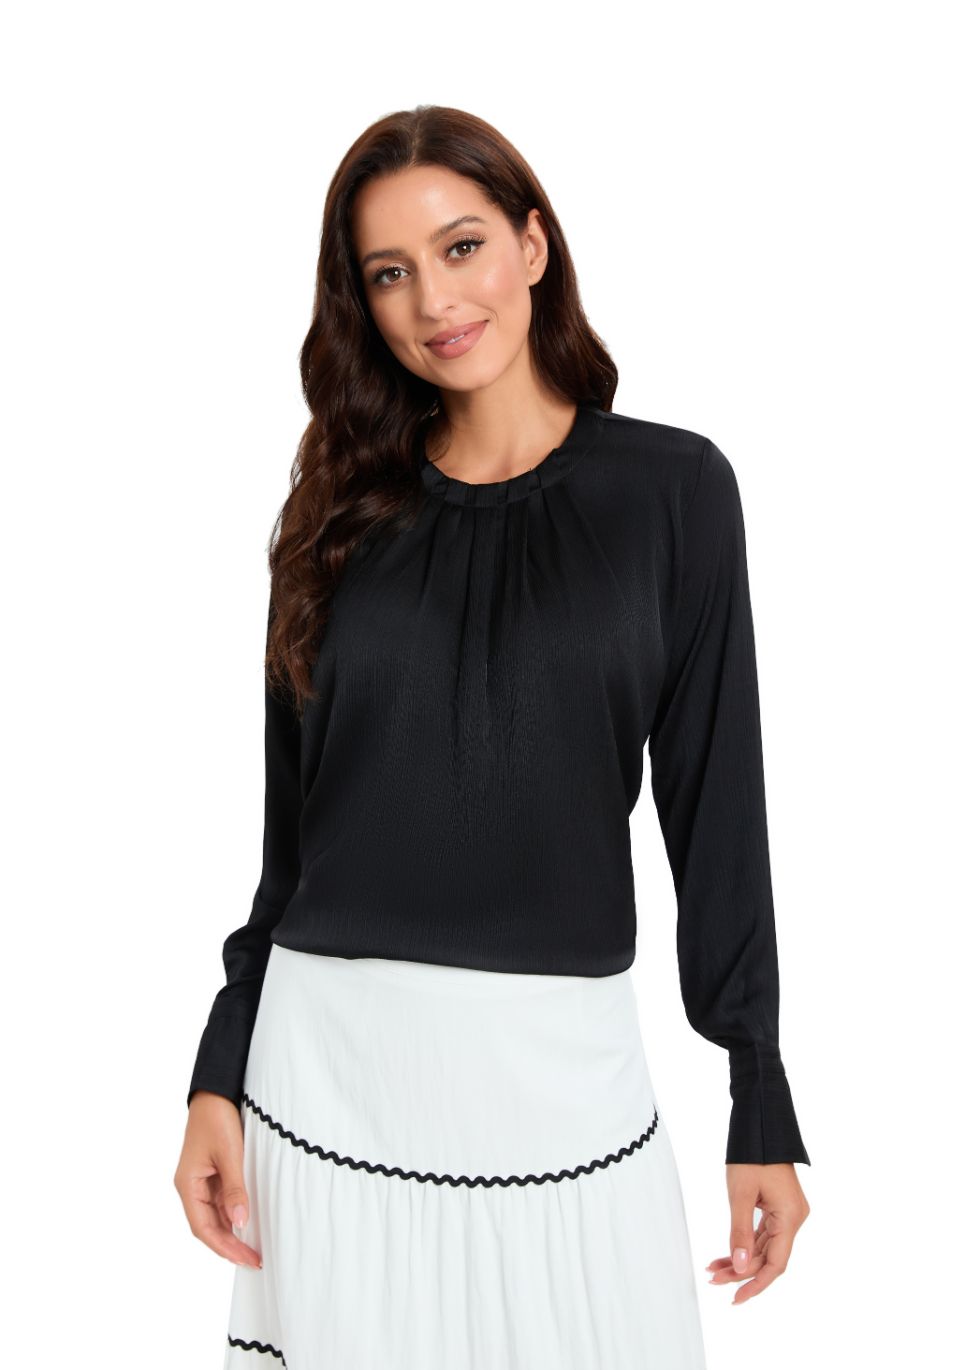 Chic Sophistication Black Top